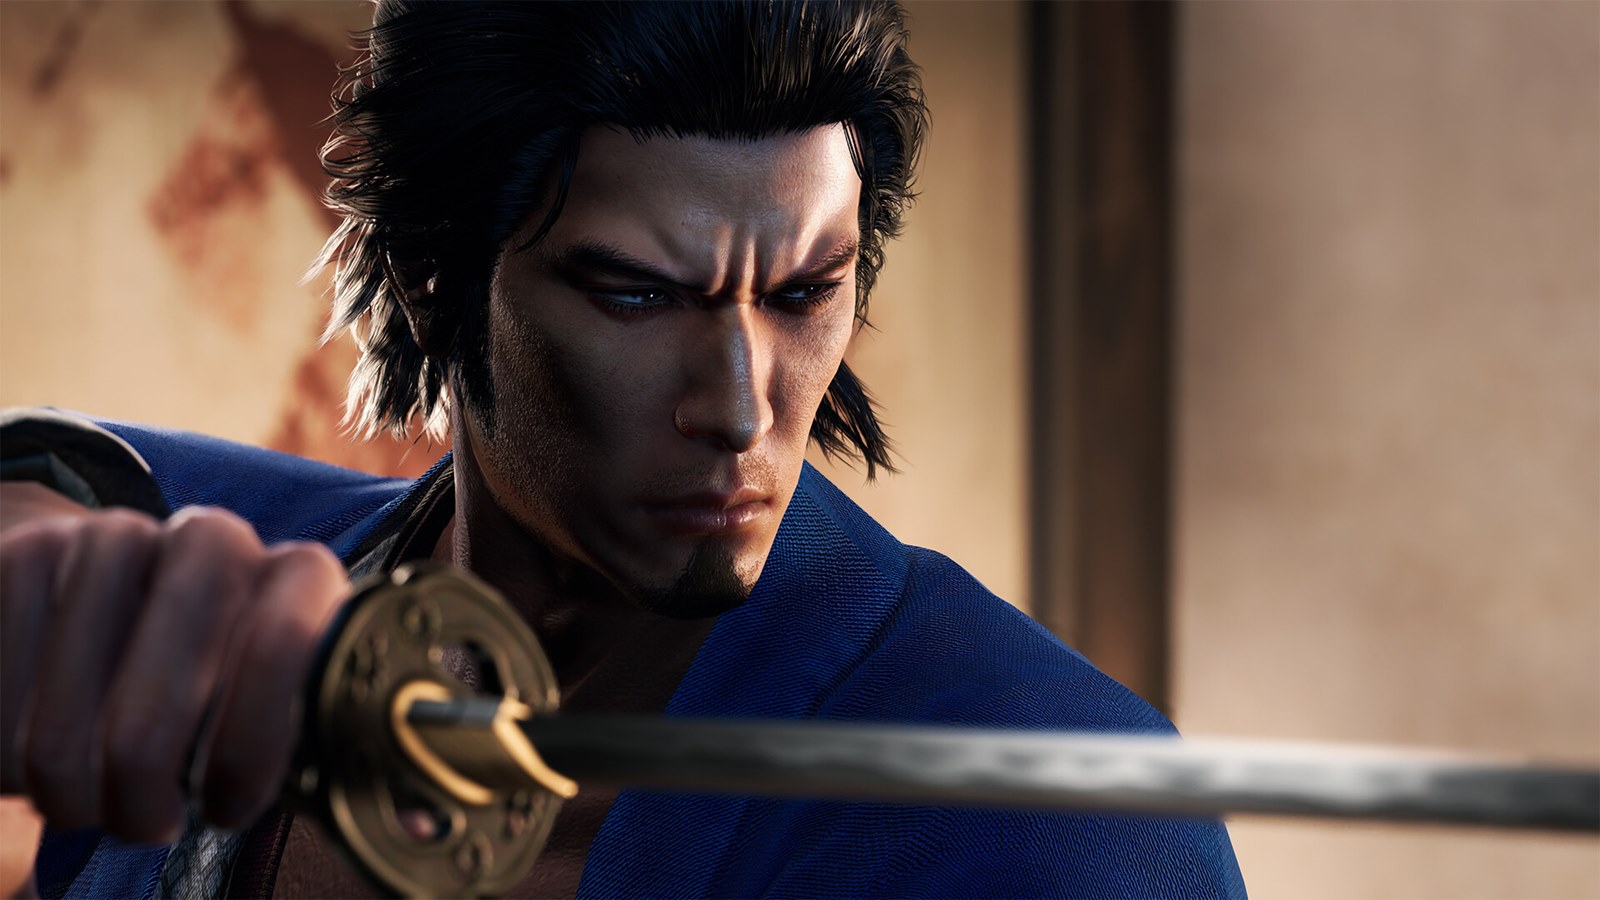 Like a Dragon: Ishin! devs discuss why they chose Unreal Engine over Dragon Engine [PR interview]